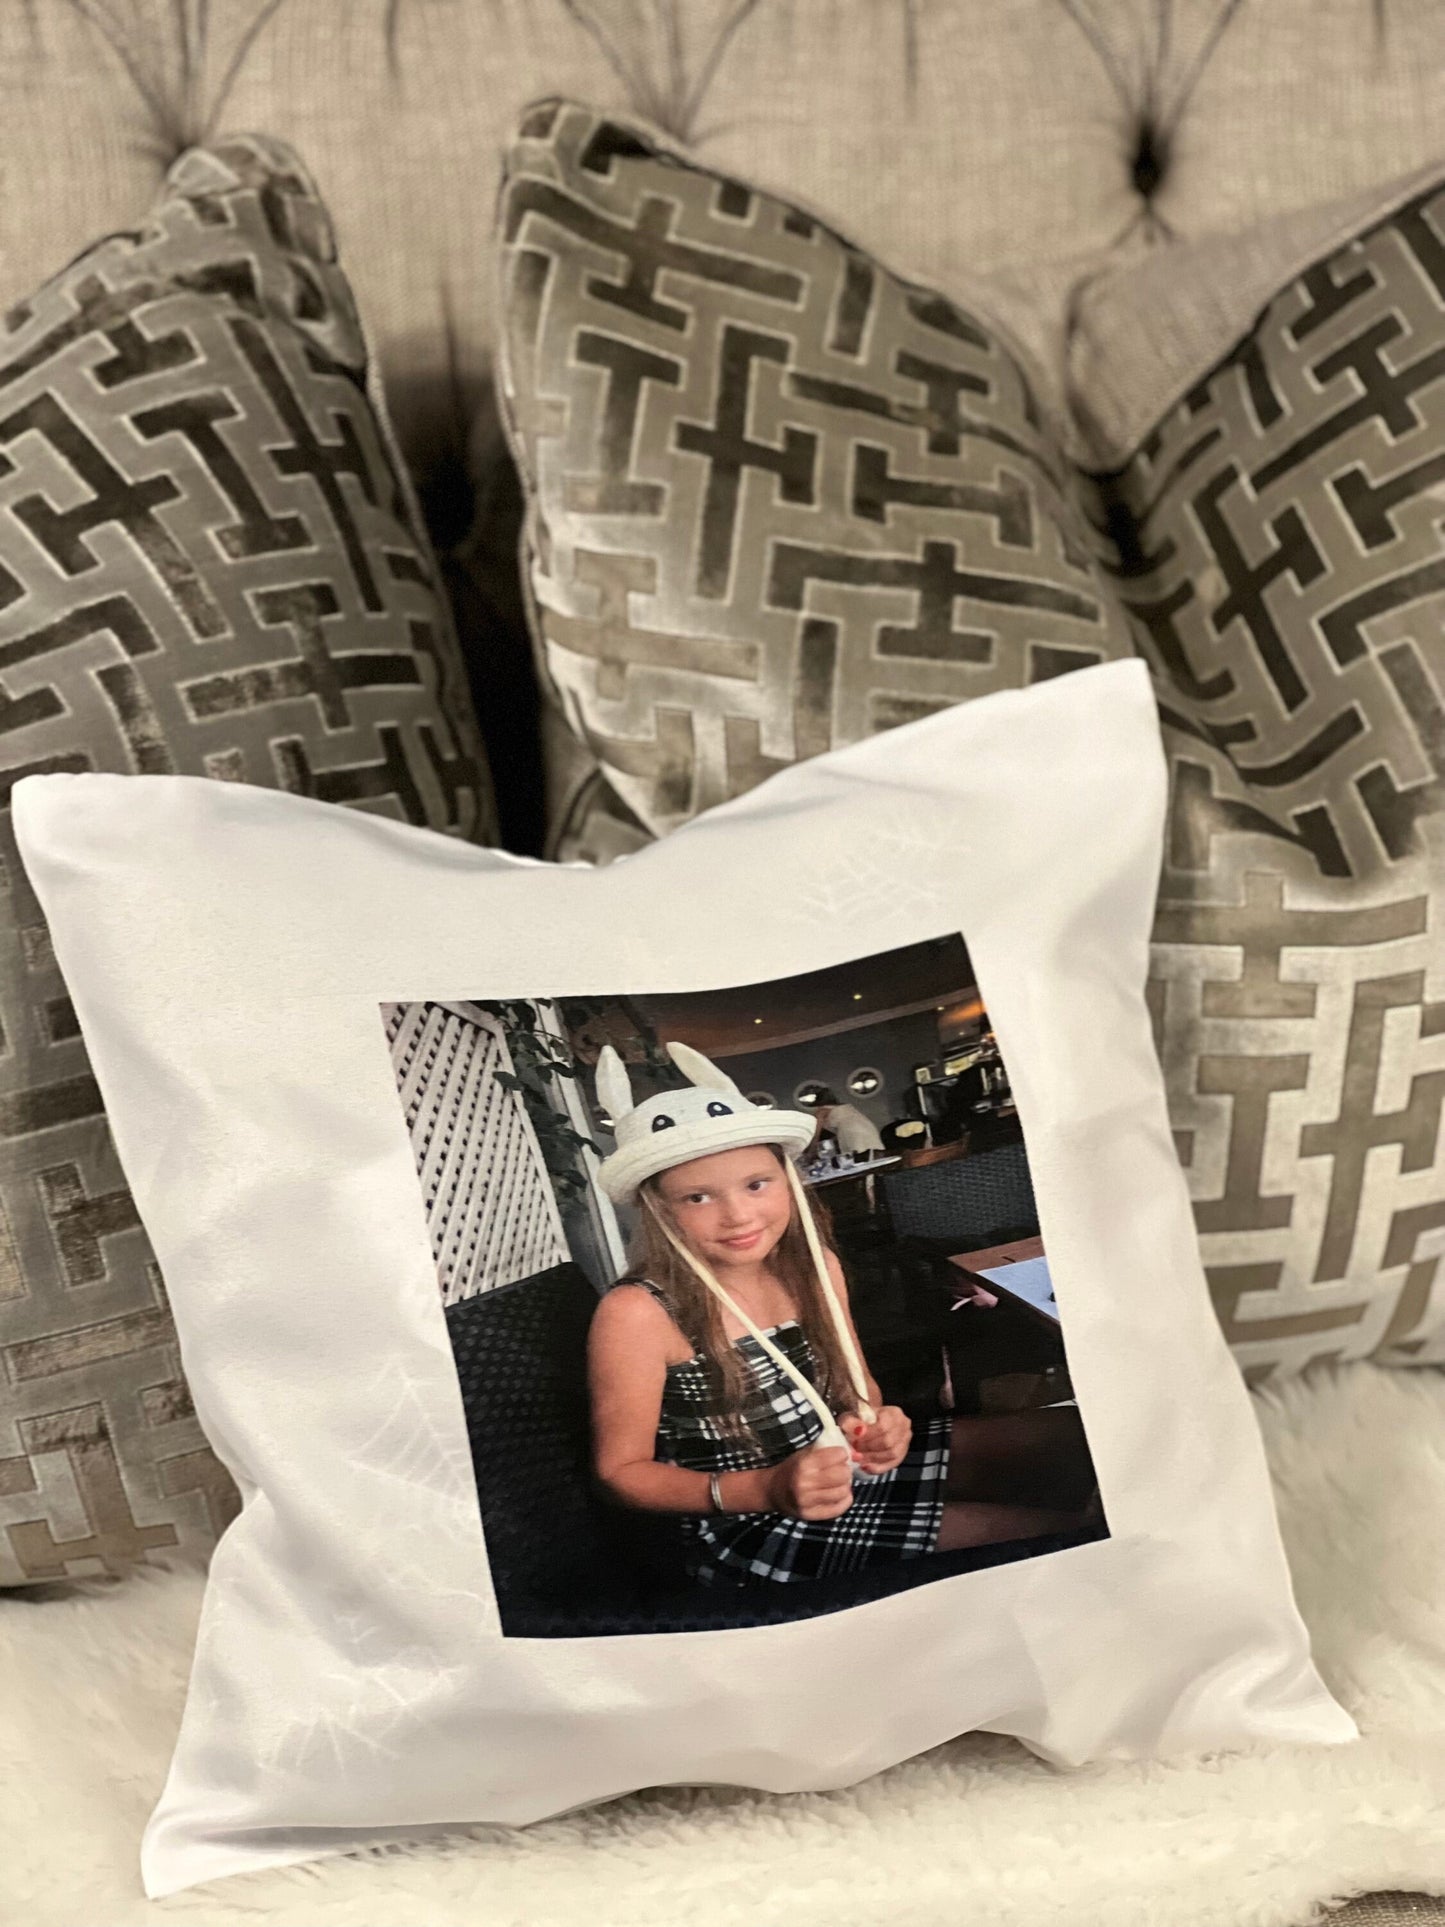 Personalised Cushion Cover, Gift, Present.